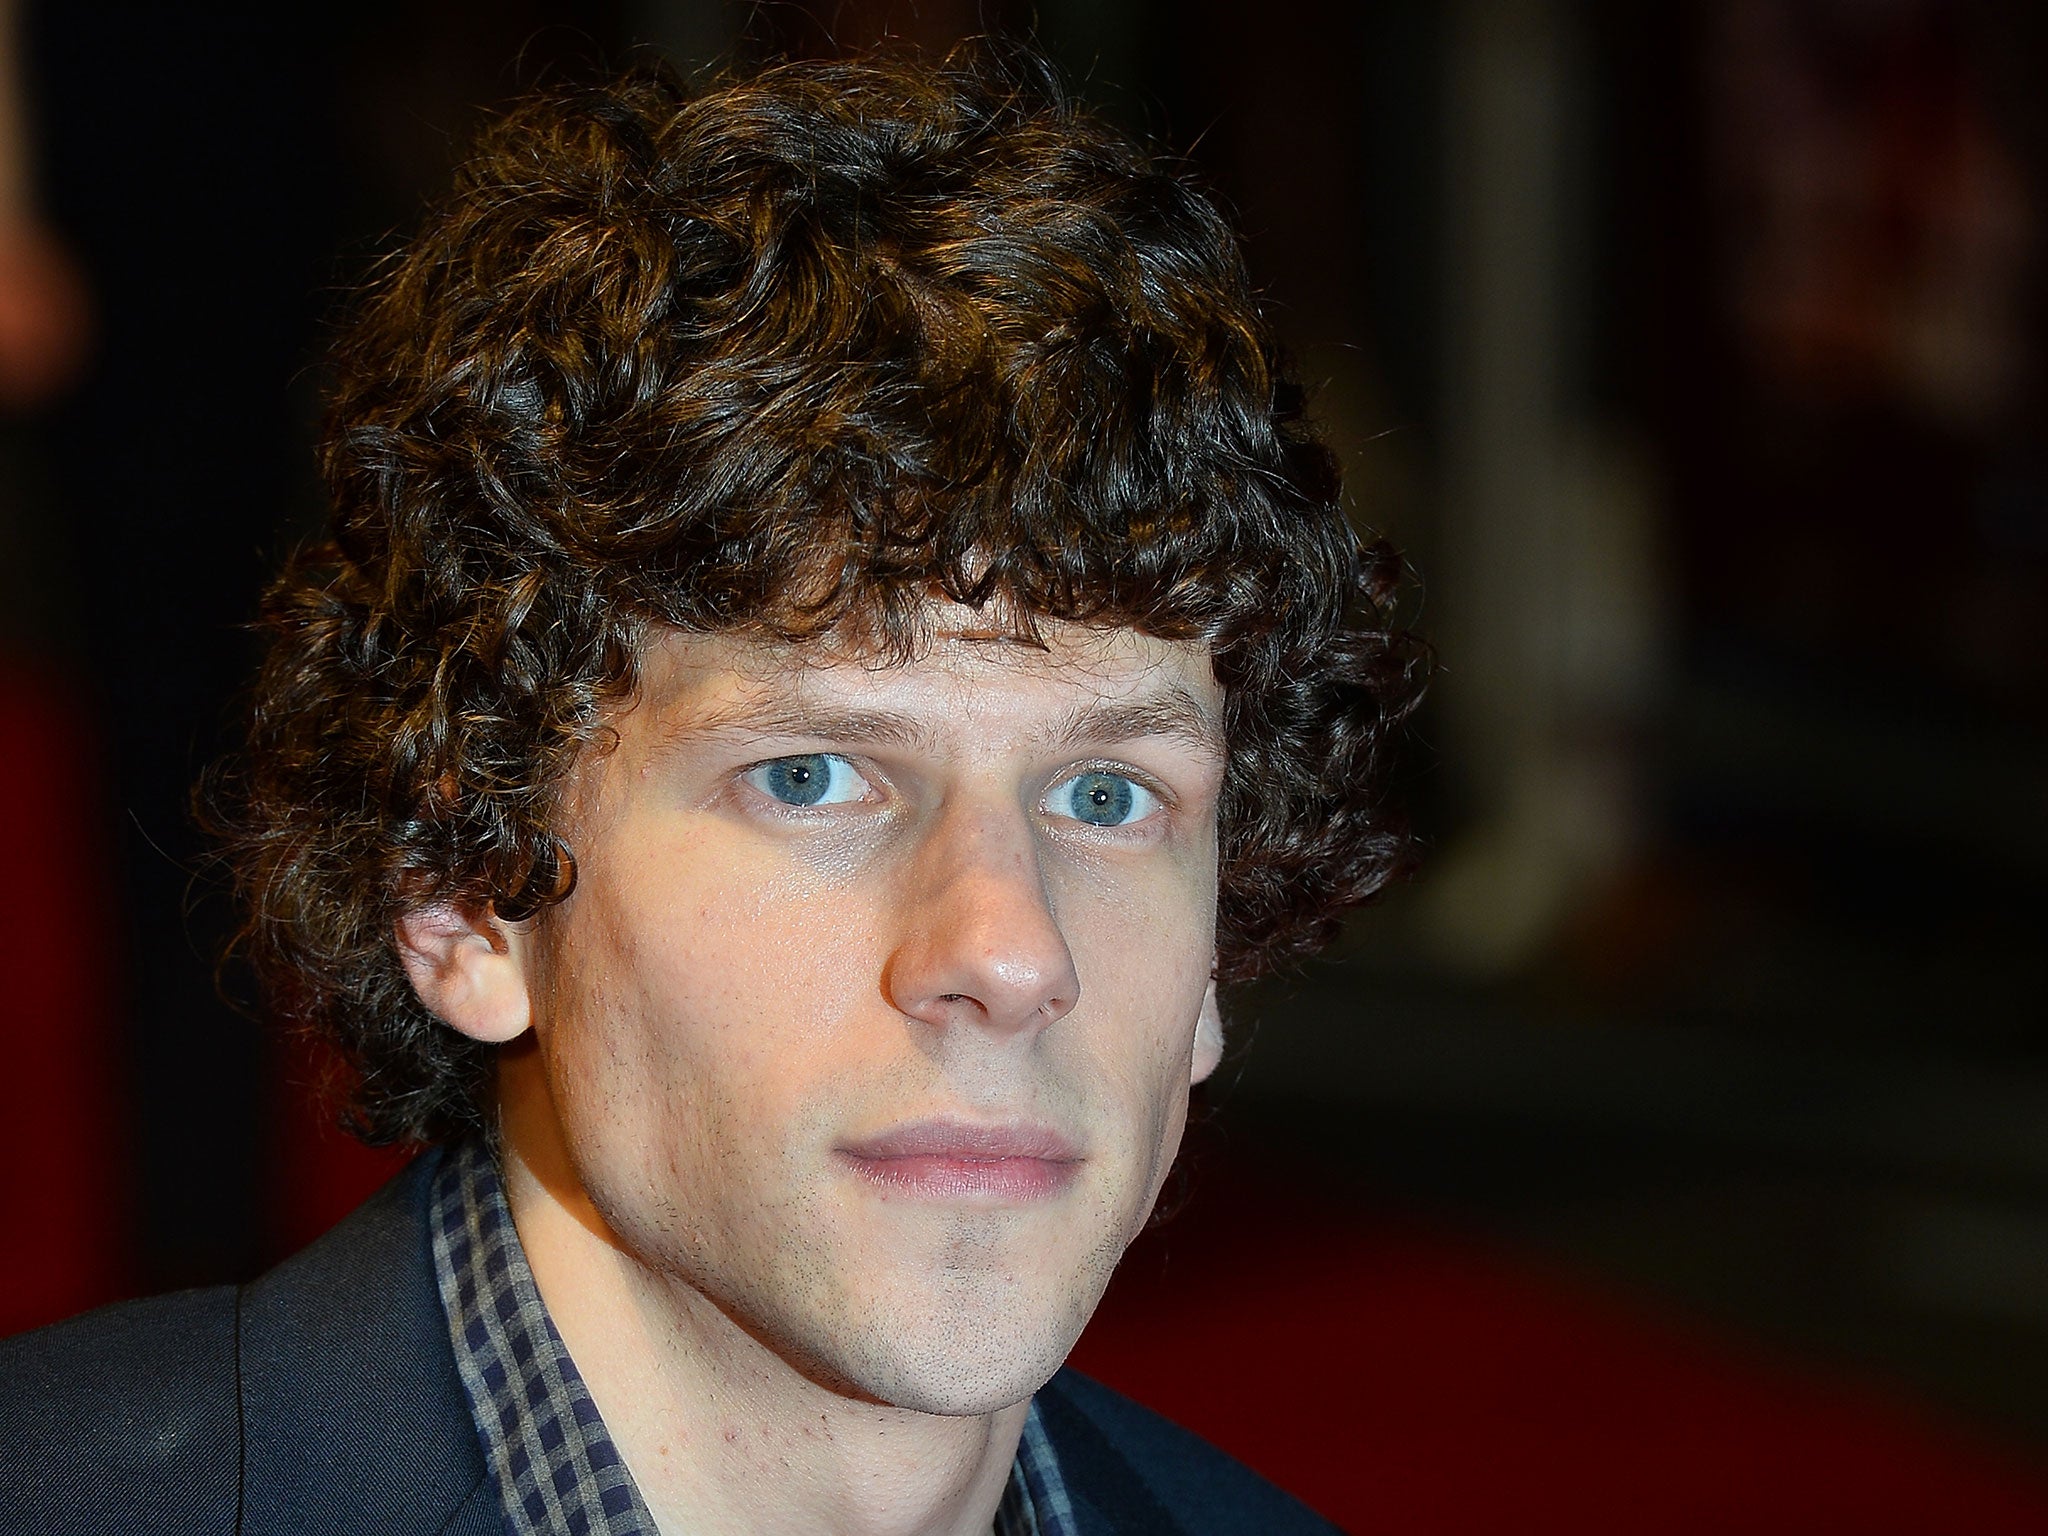 Jesse Eisenberg had compared the experience of facing all the screaming fans to 'genocide'